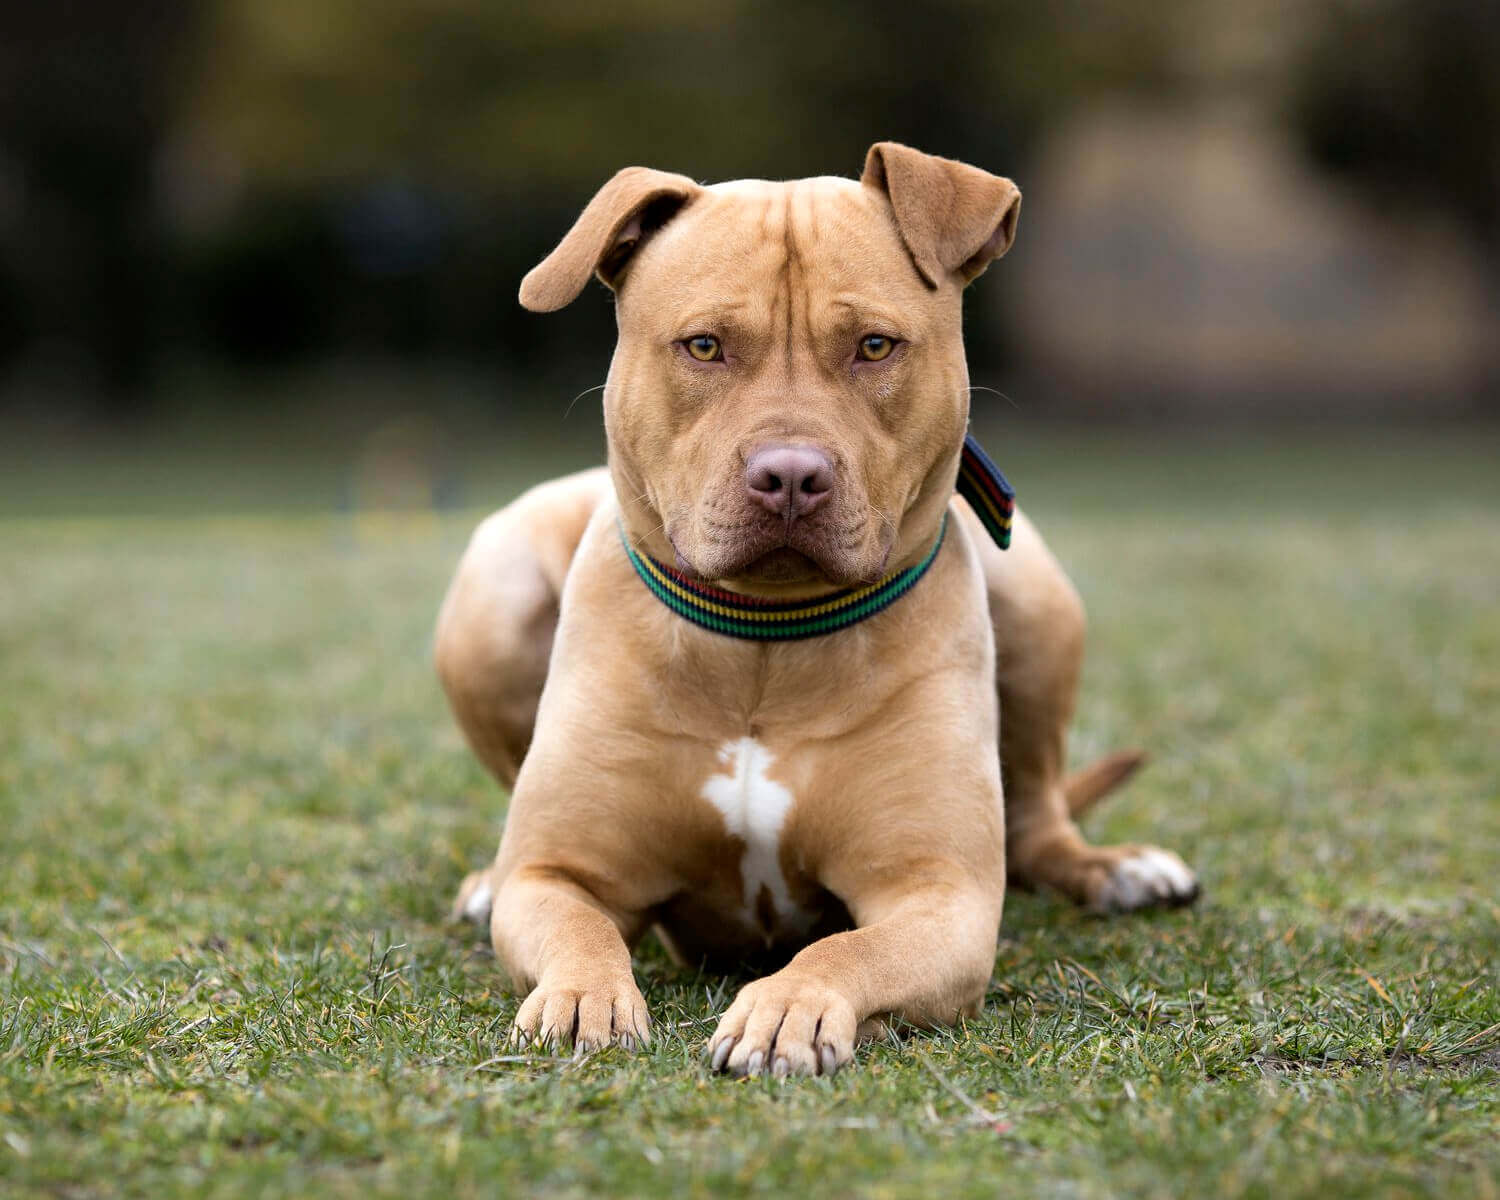 15 Amazing Facts About Staffordshire Bull Terriers You